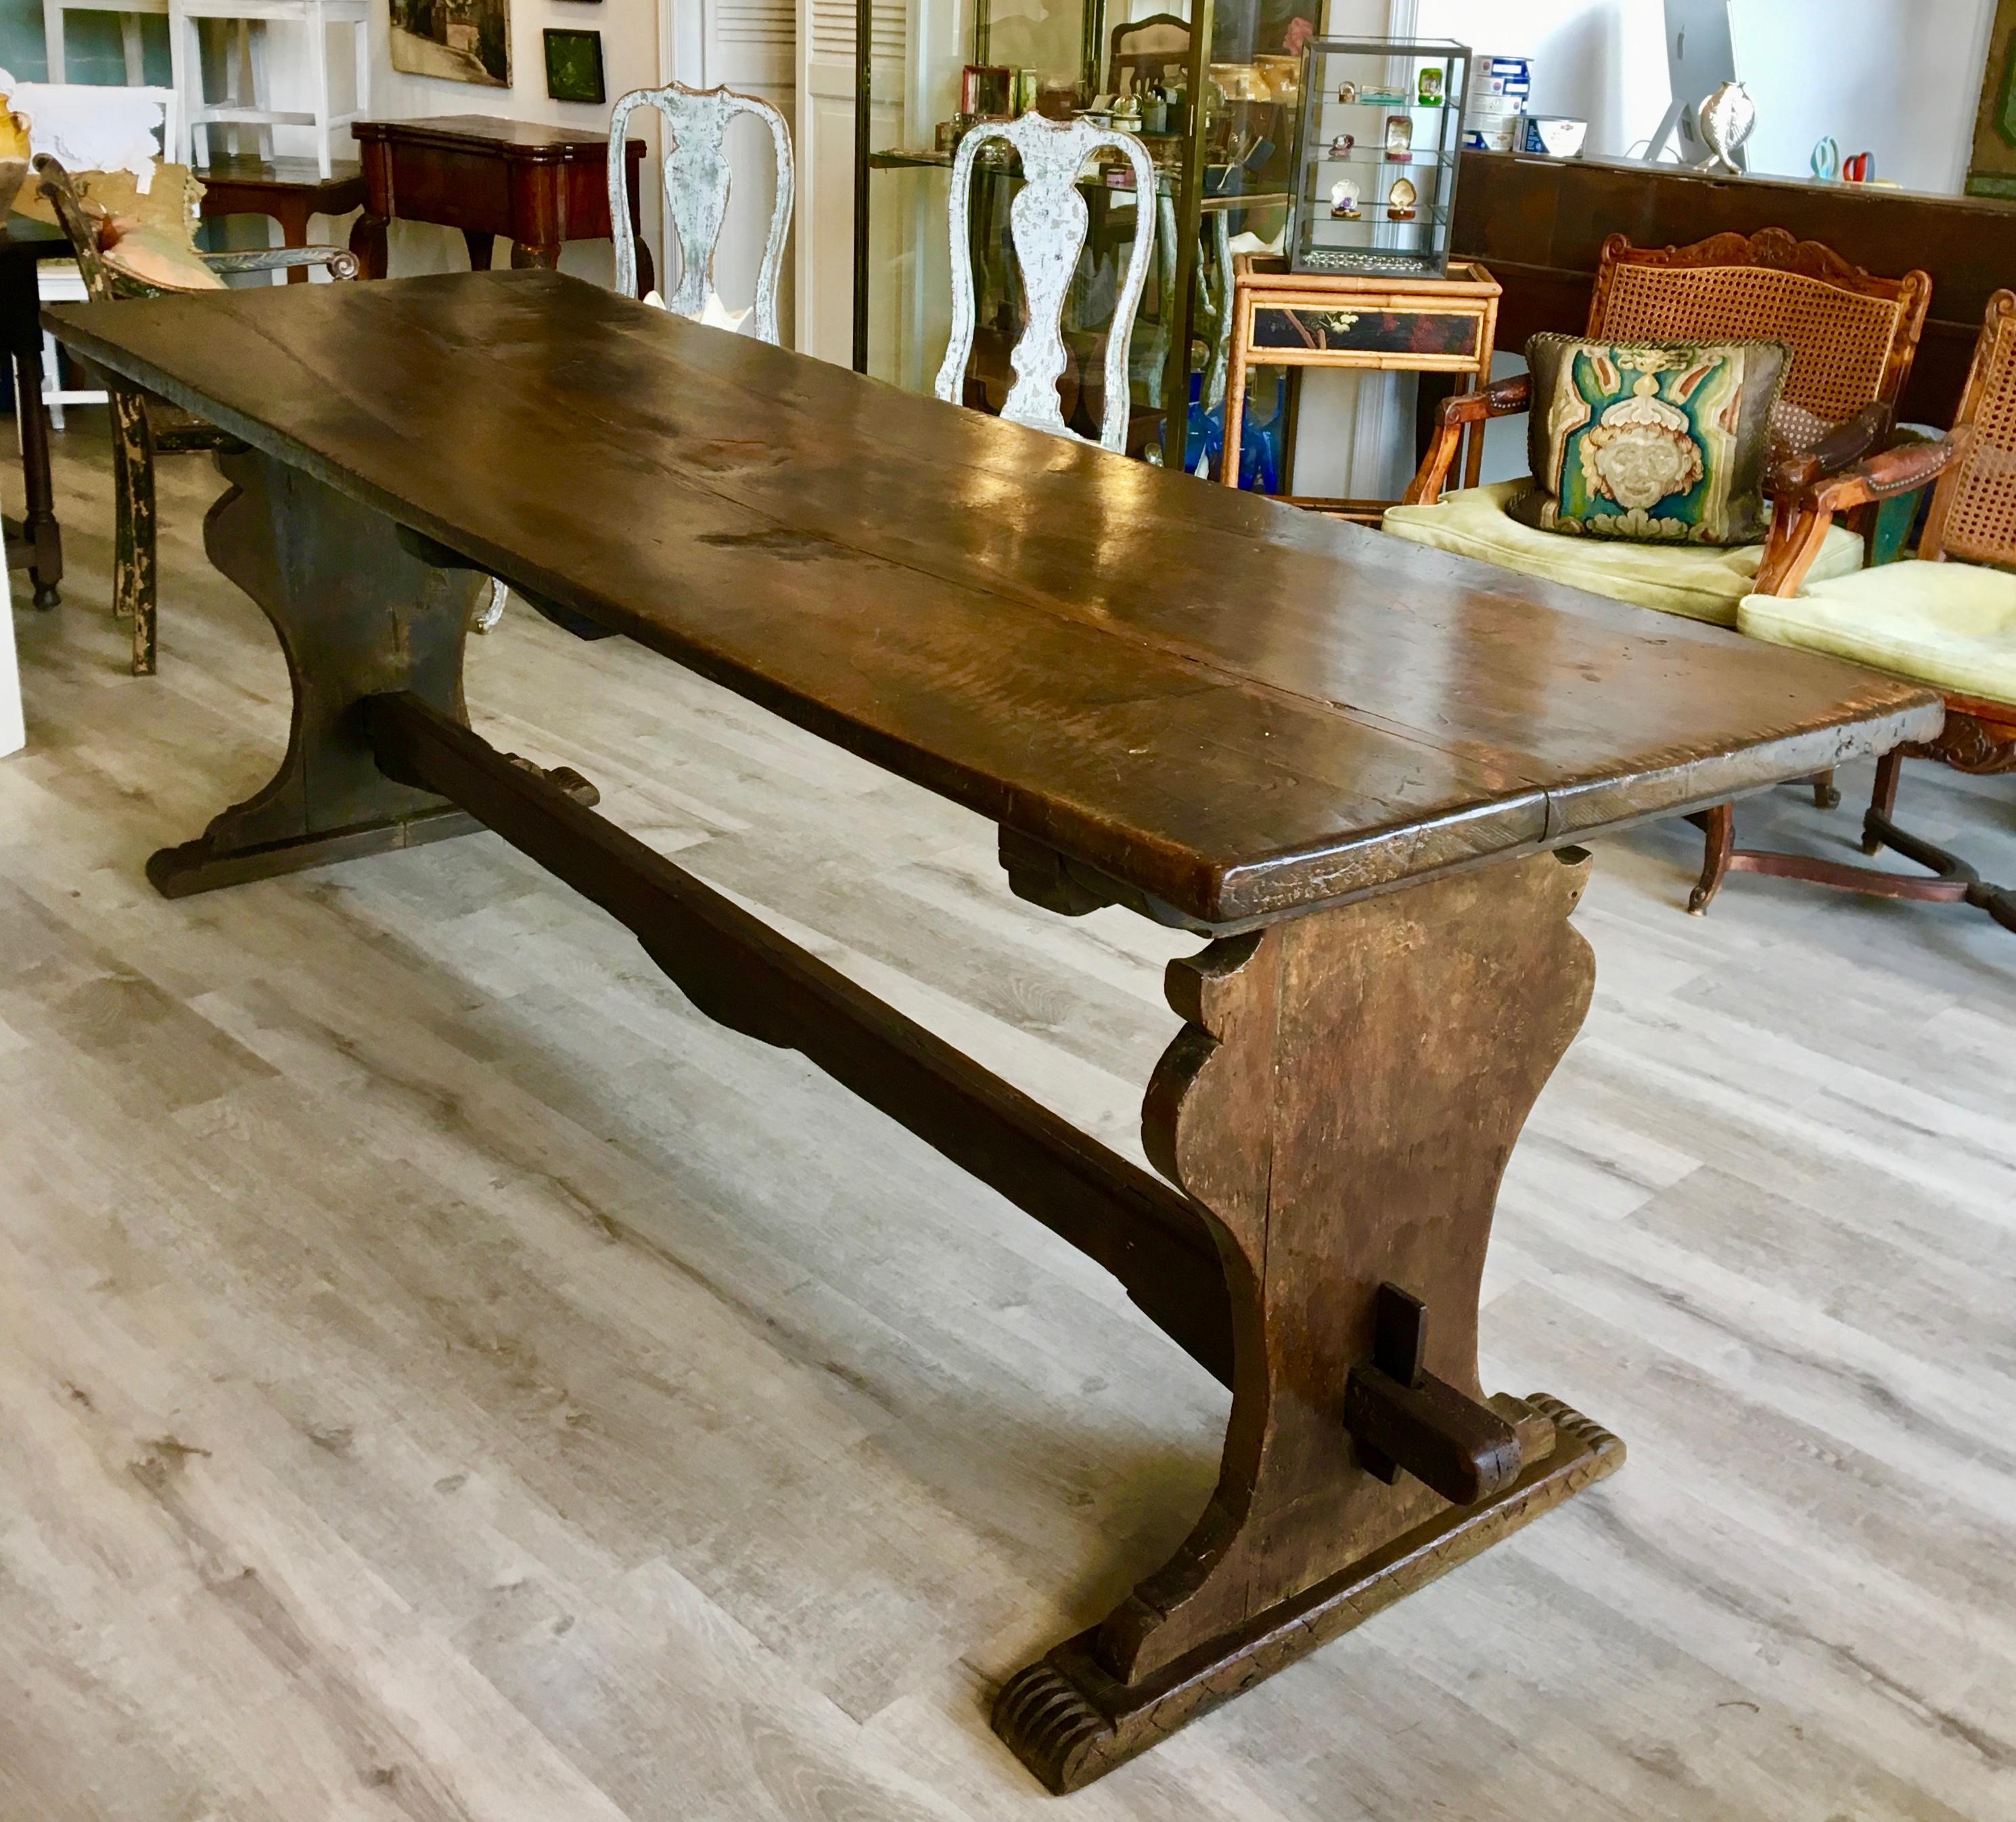 Late 17th Century Italian Walnut Dining Refectory Table, with extraordinary single-plank top, over shaped supports and a wedge-pegged cross brace. The rare piece is in excellent condition and has a rich, glowing patina.